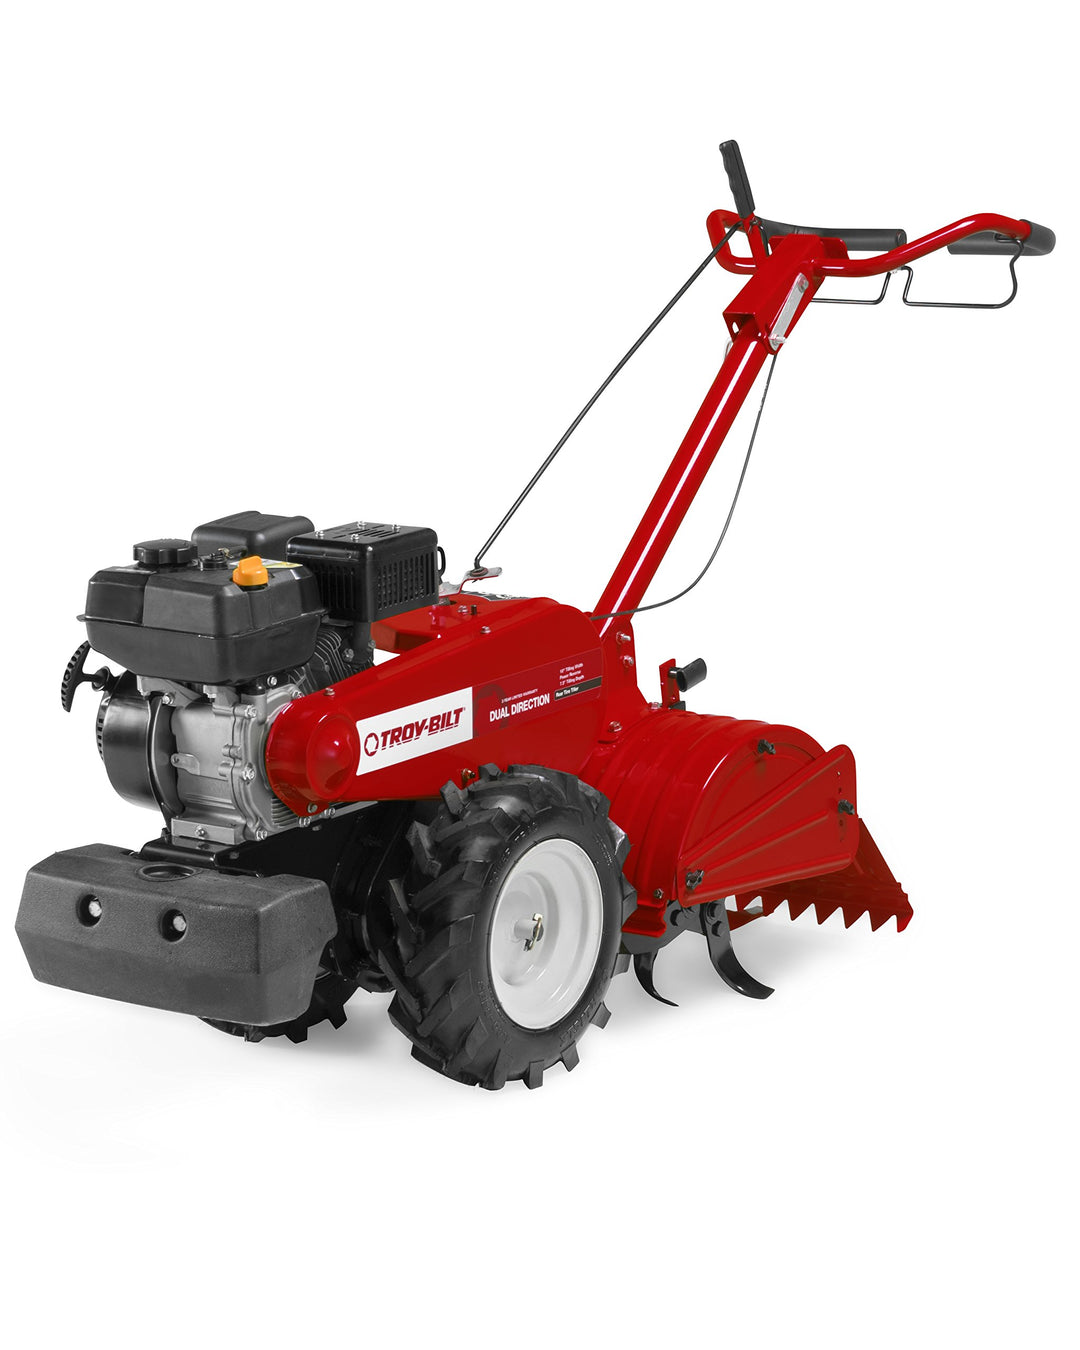 Mustang 18 in. 208 cc Gas OHV Engine Rear-Tine Tiller with Forward-Rotating and Counter-Rotating Tilling Options